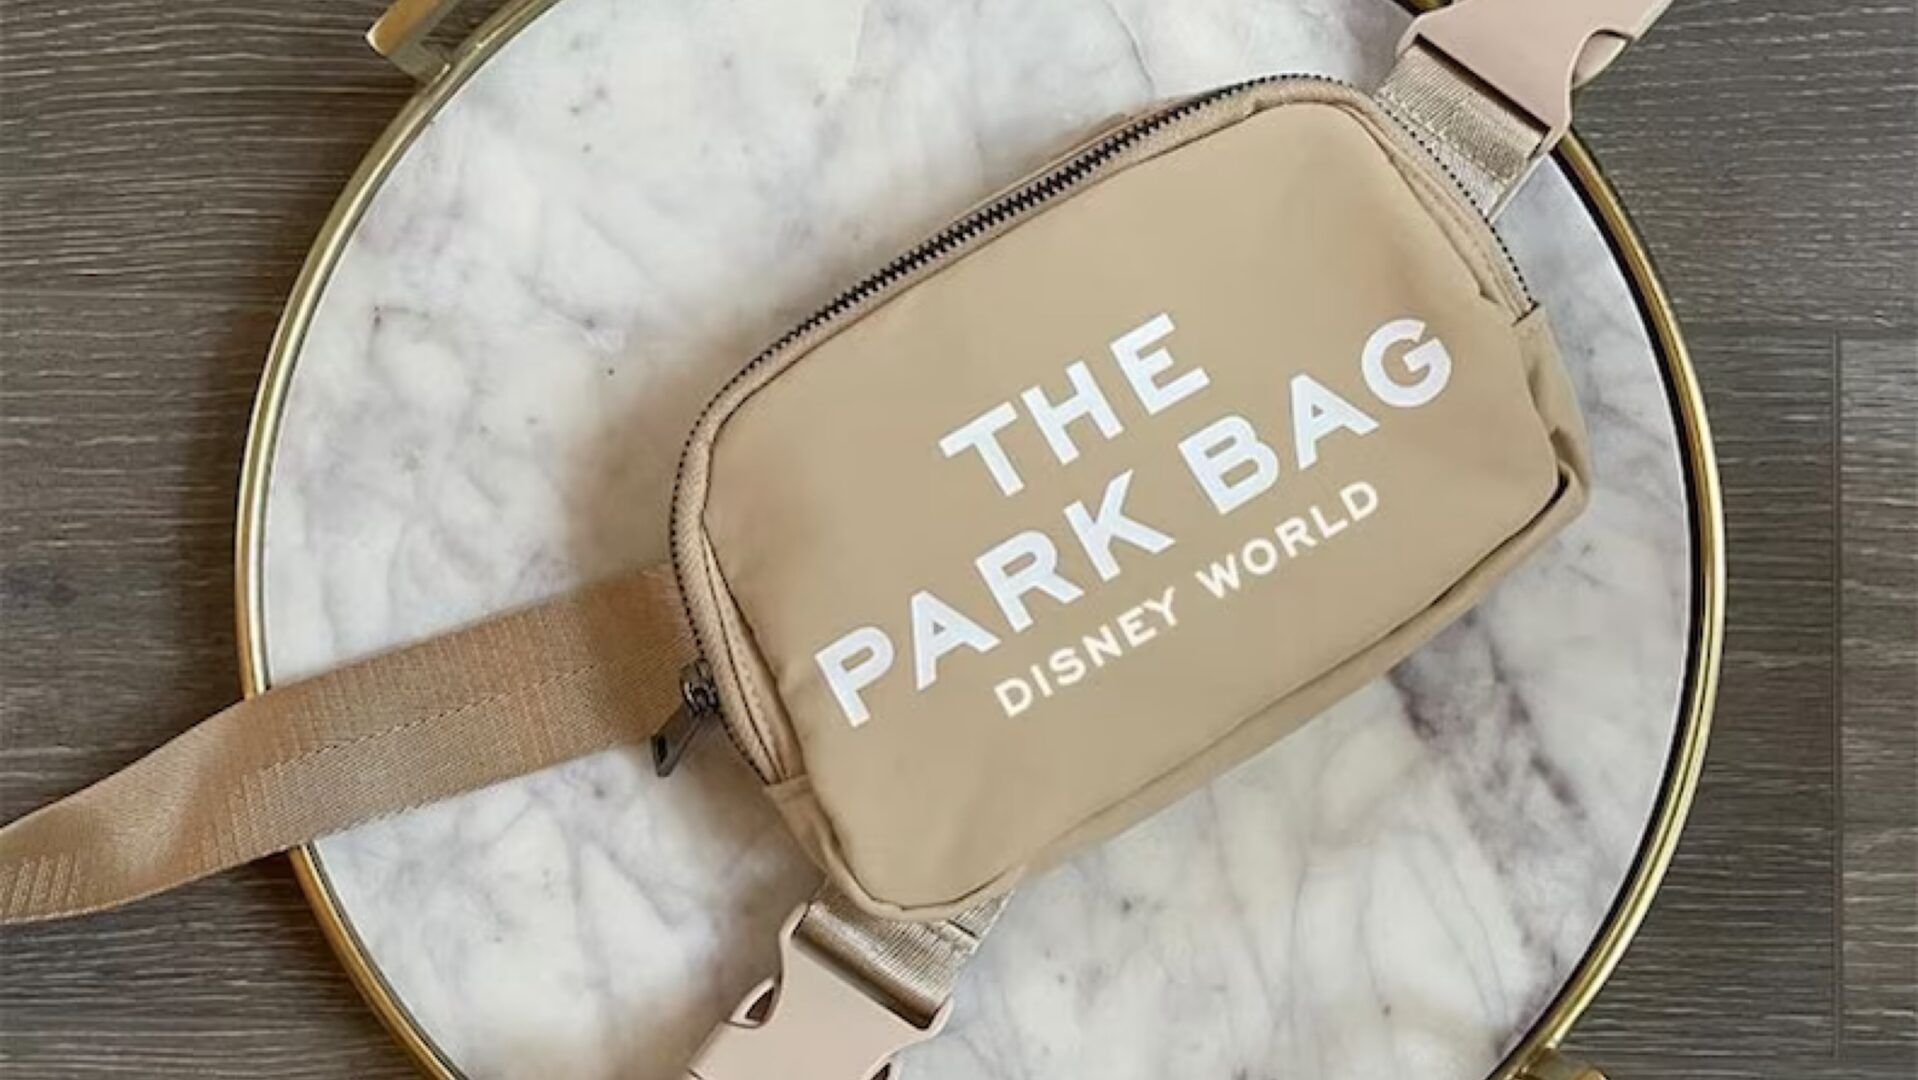 Must Have The Park Bag Fanny Pack For Your Next Visit To A Disney Park!